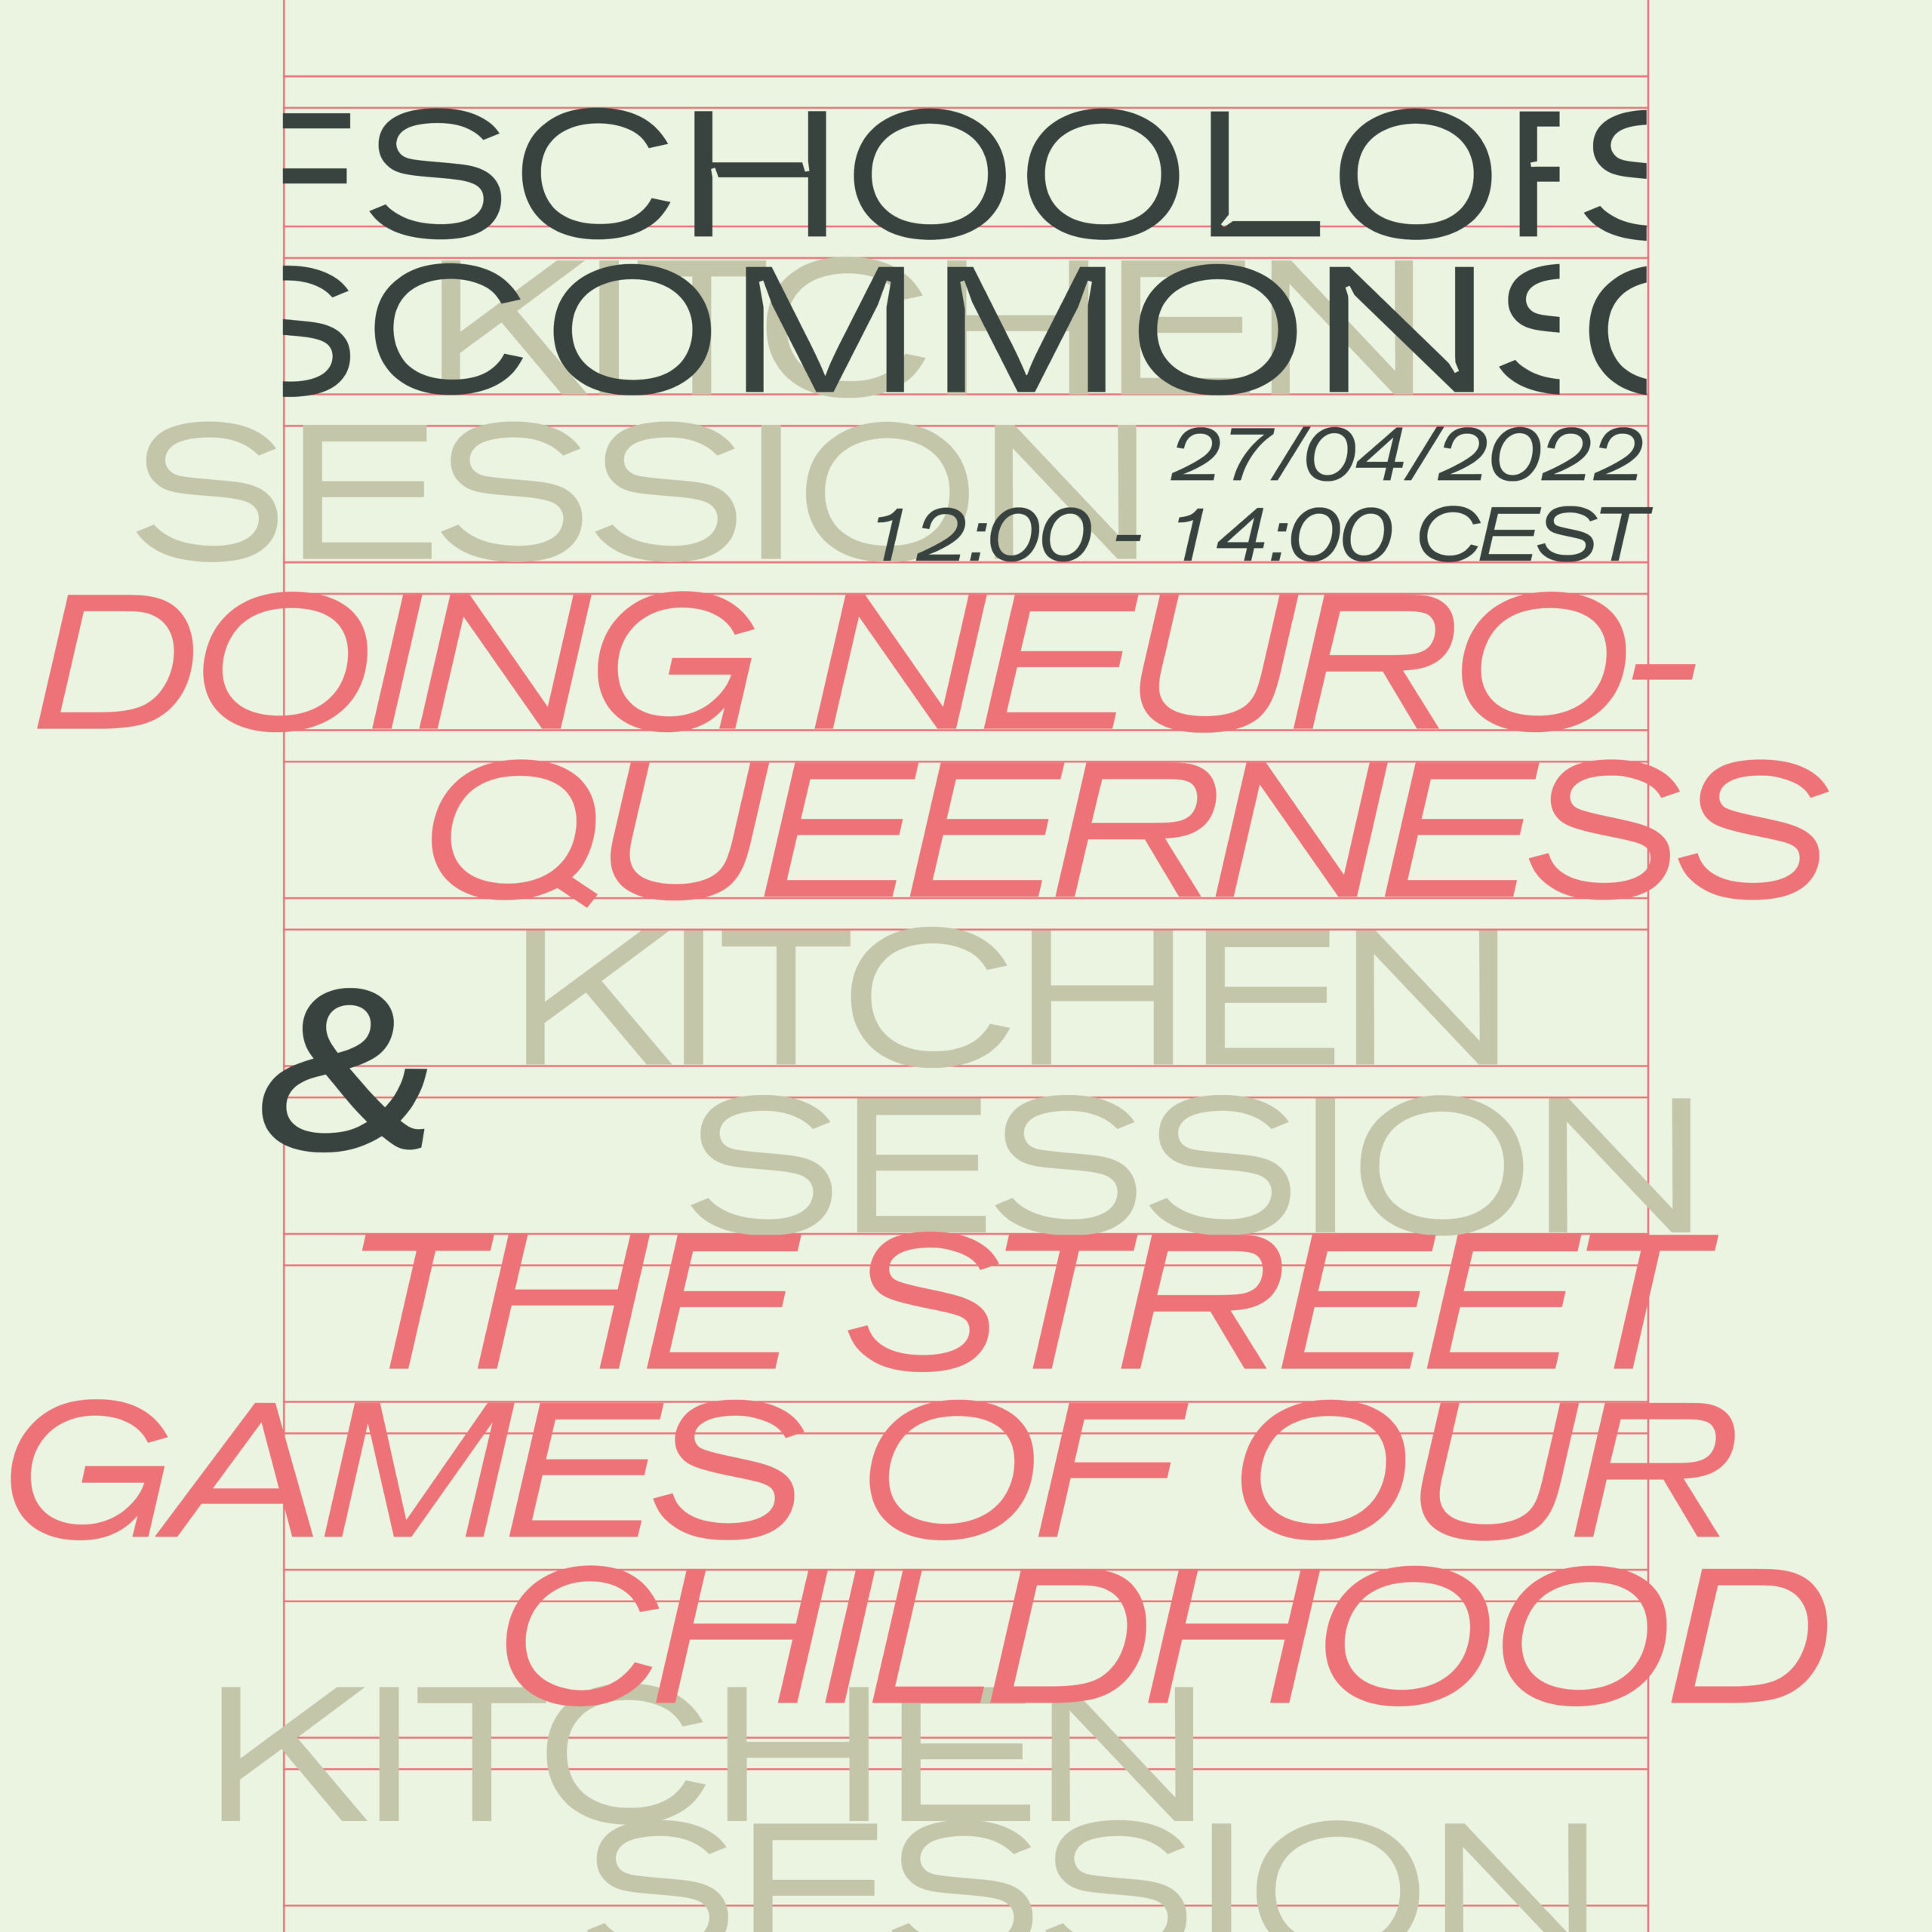 Kitchen Session: Doing Neuroqueerness & The Street Games of Our Childhood